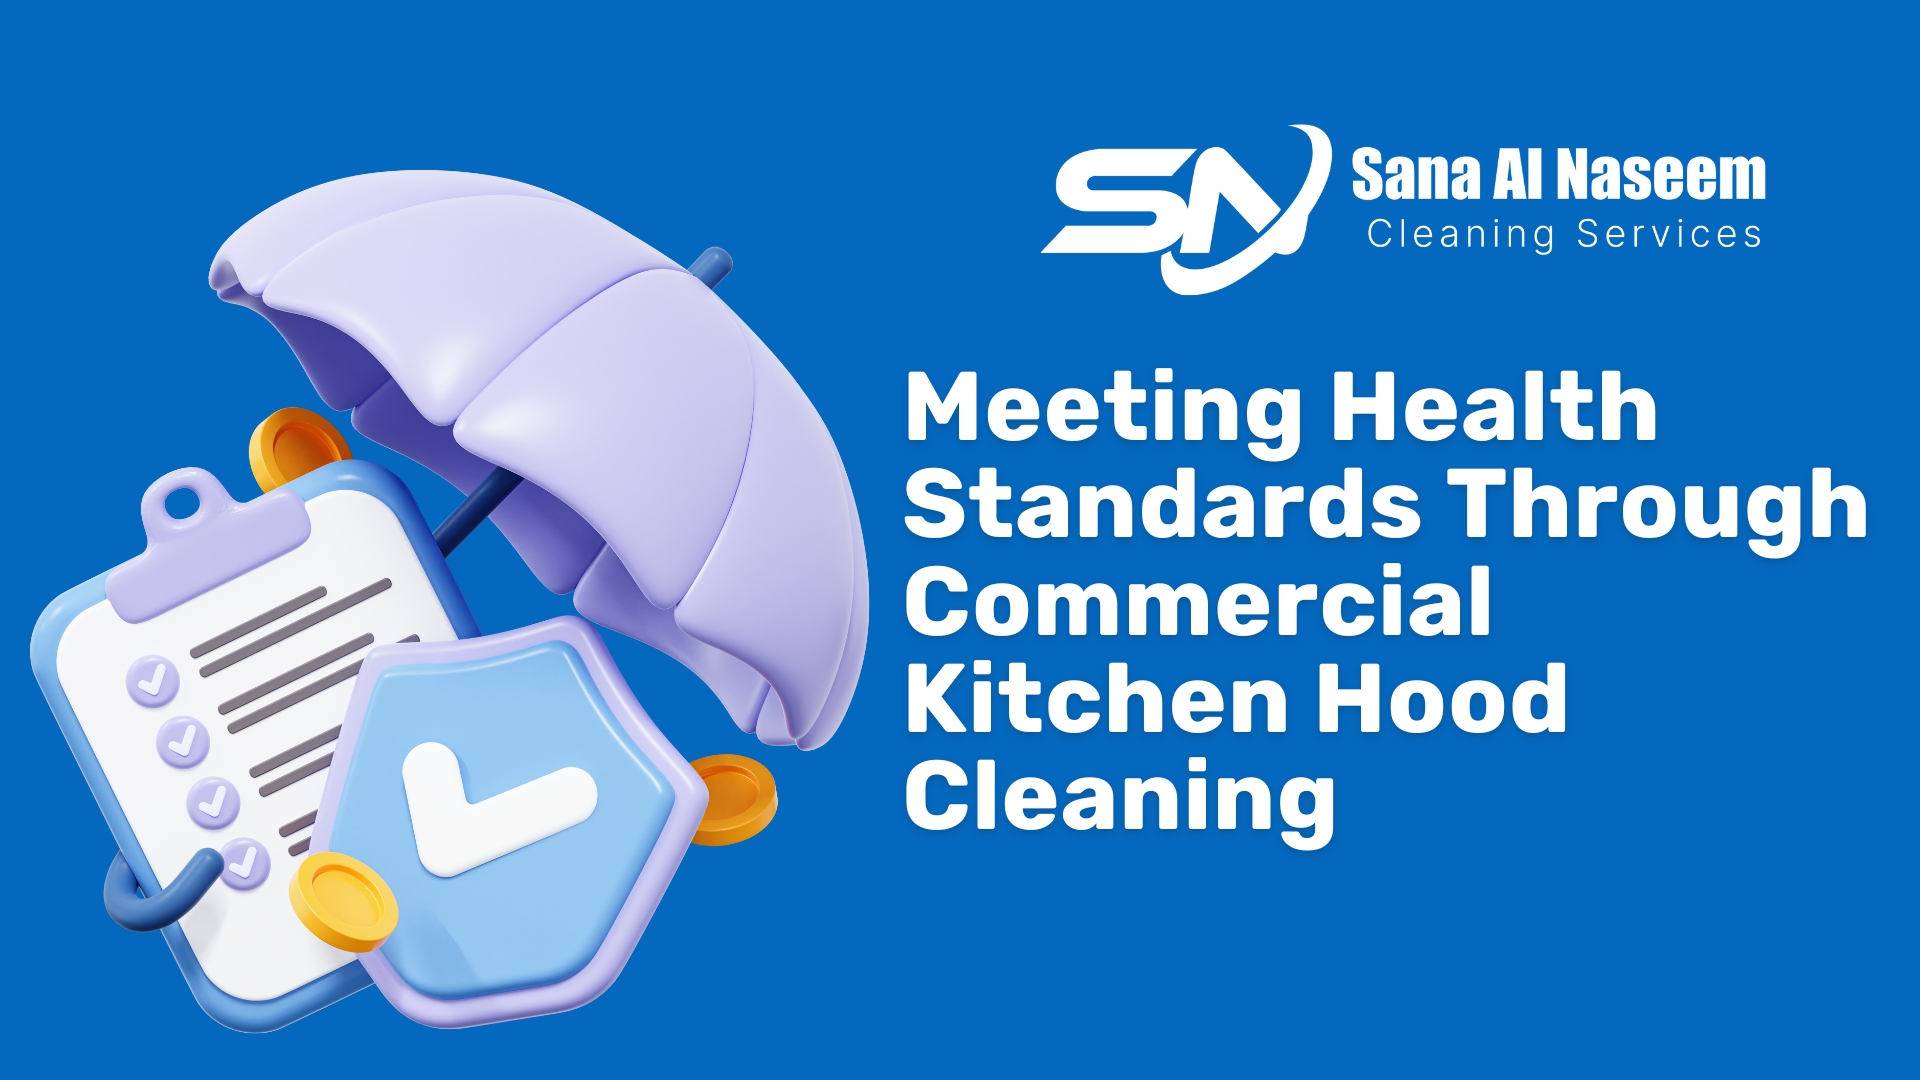 Meeting Health Standards Through Commercial Kitchen Hood Cleaning